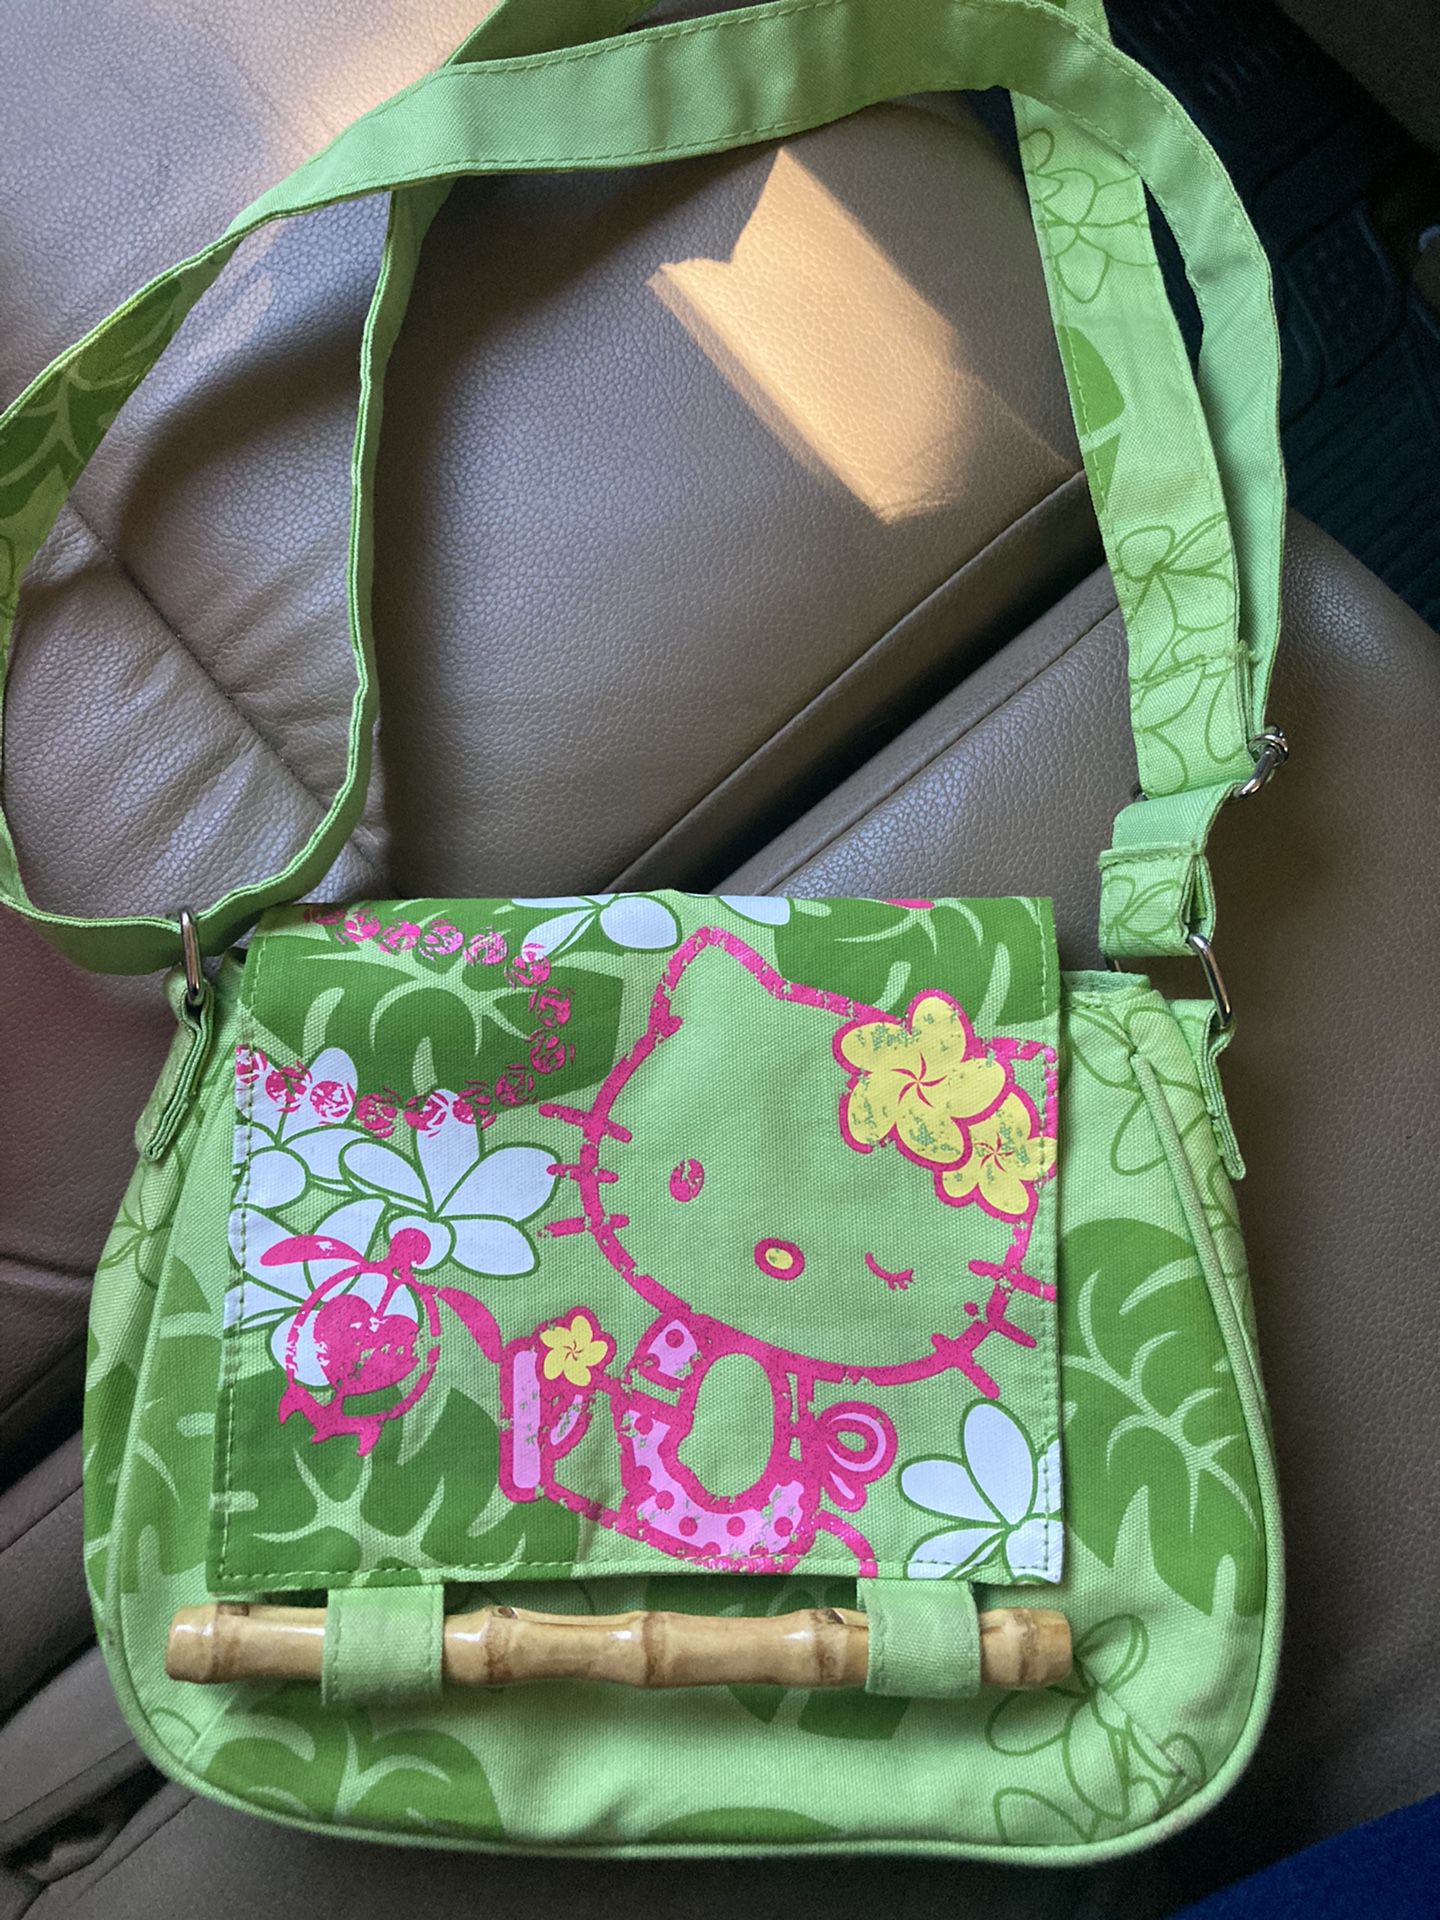 Vintage Hello Kitty Purse 2011 for Sale in Los Angeles, CA - OfferUp